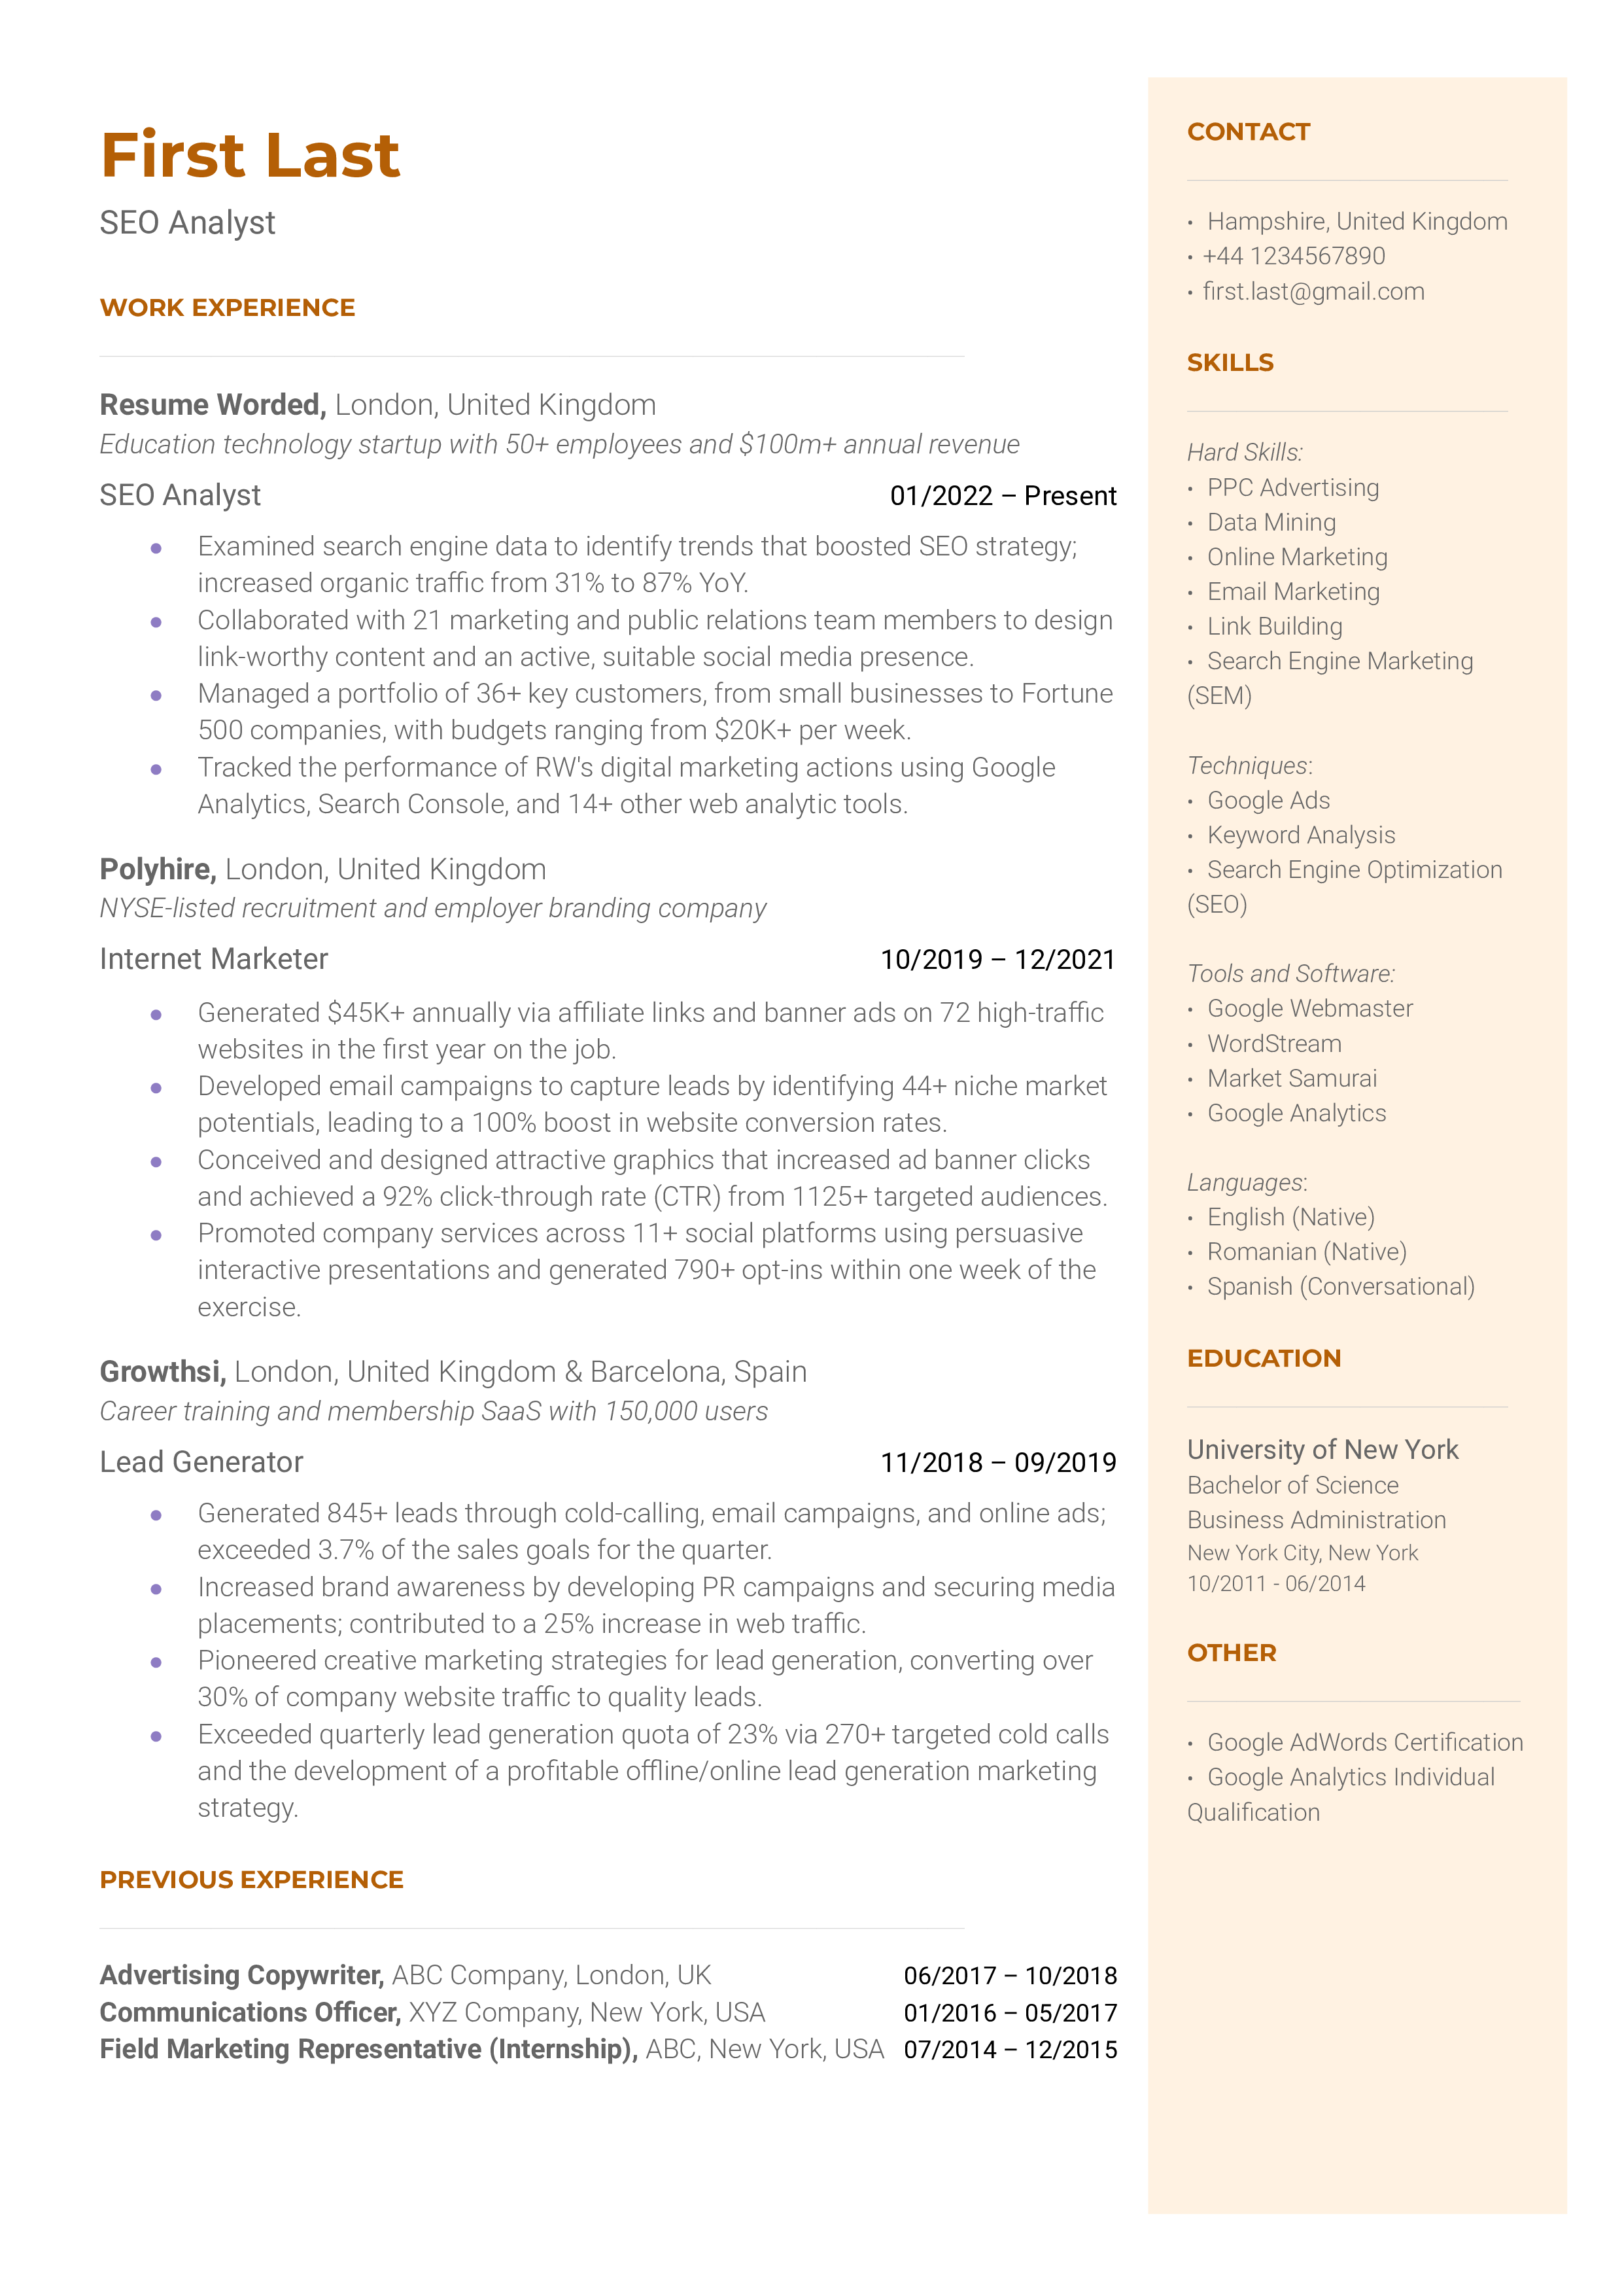 A well-organized CV for an SEO Analyst highlighting relevant skills, tools and quantified achievements.